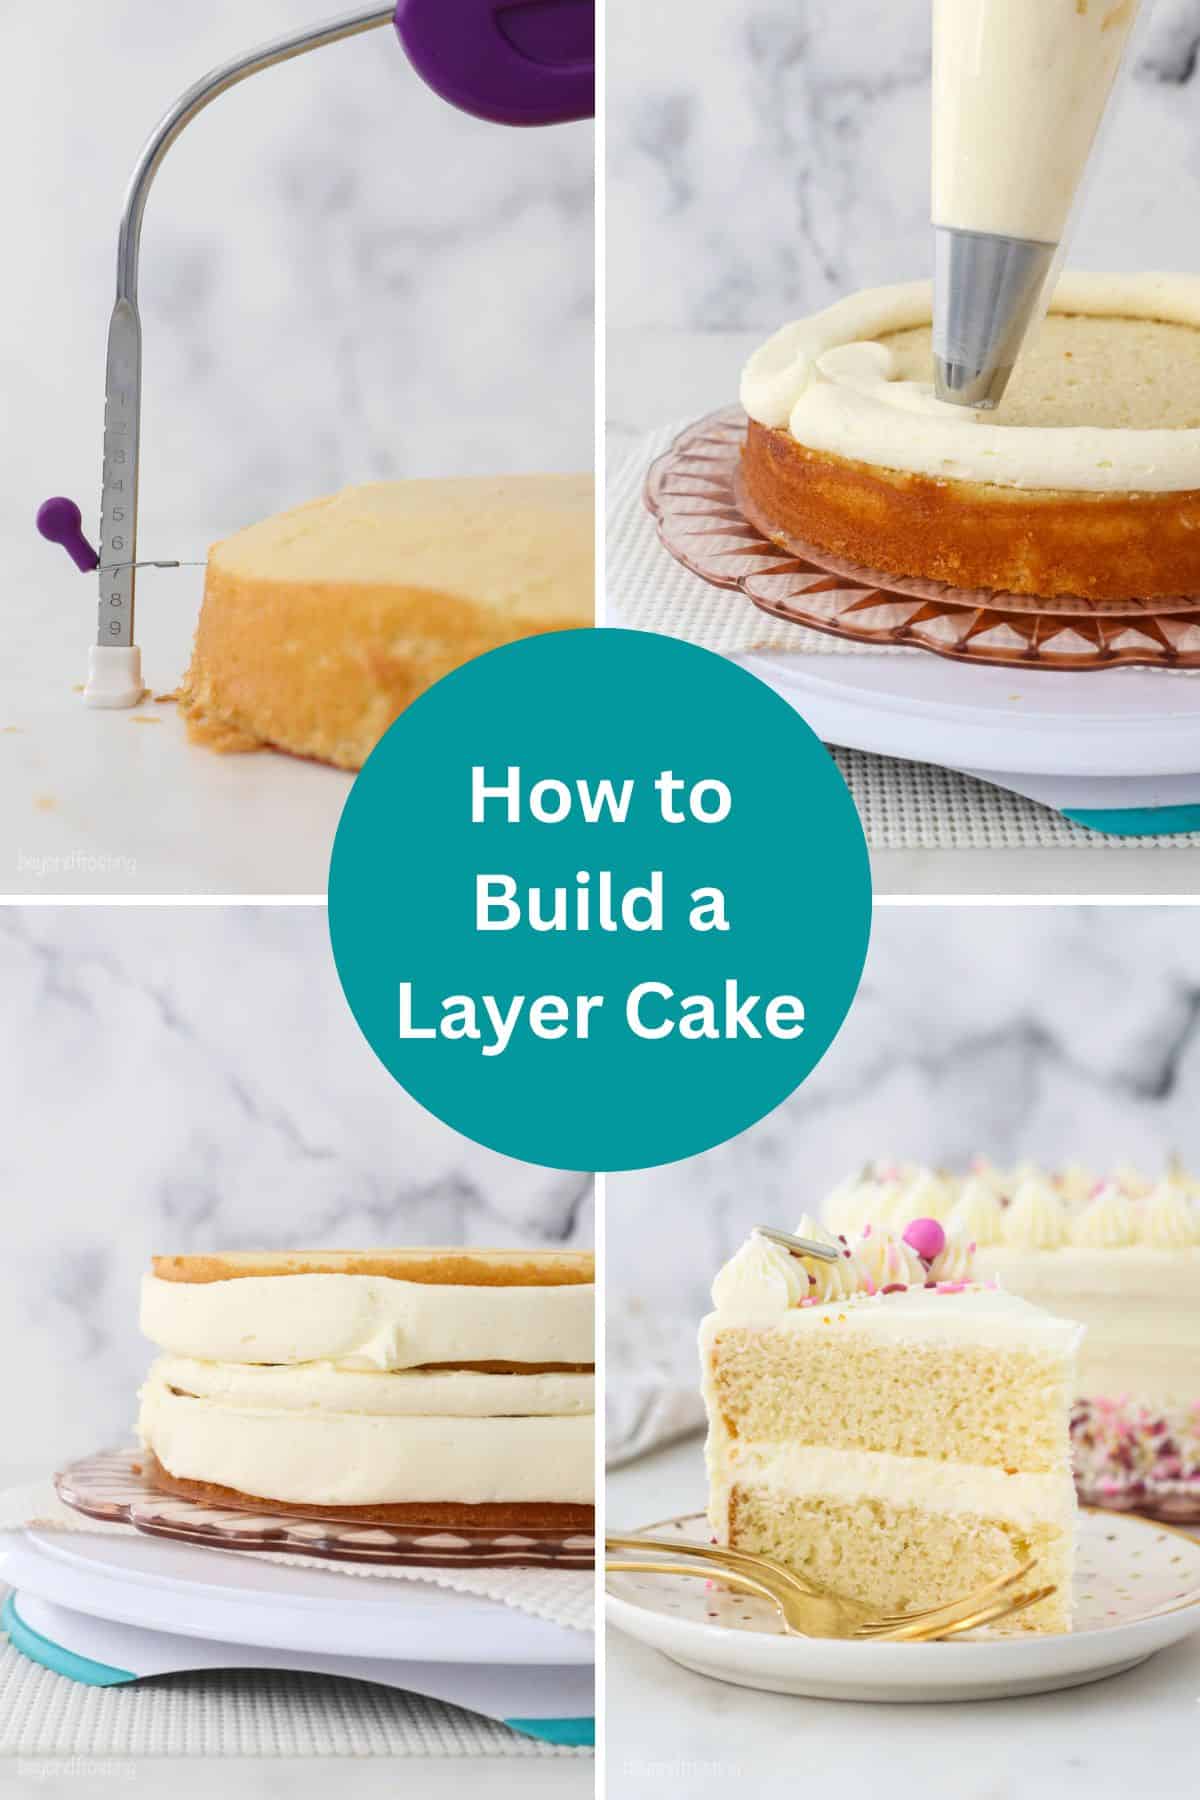 Discover more than 67 basic layer cake